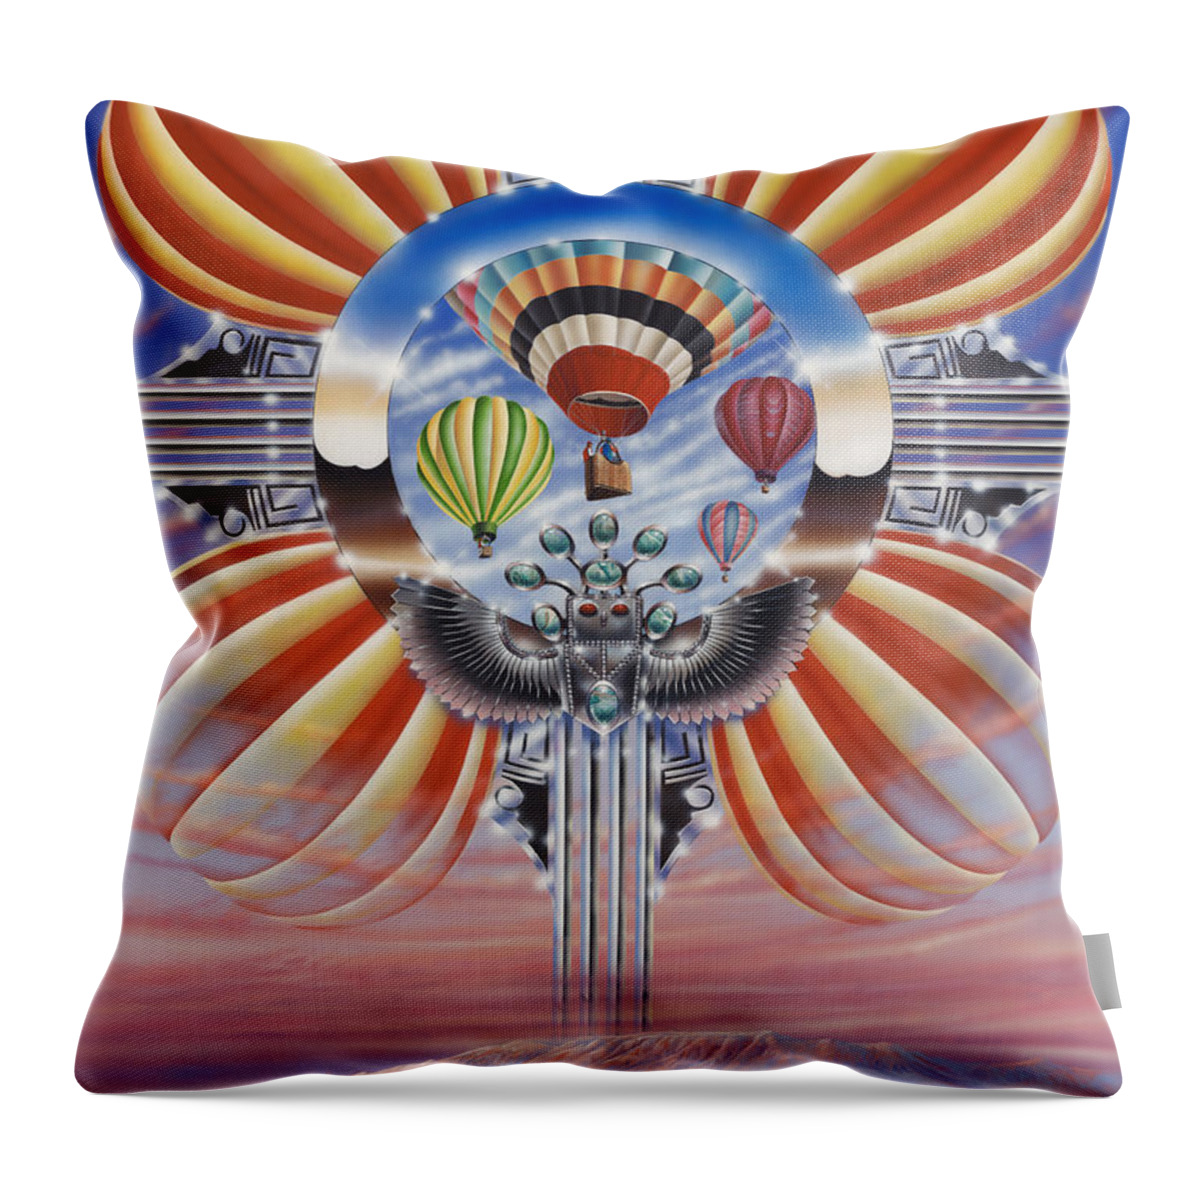 Balloons Throw Pillow featuring the painting Fiesta De Colores by Ricardo Chavez-Mendez